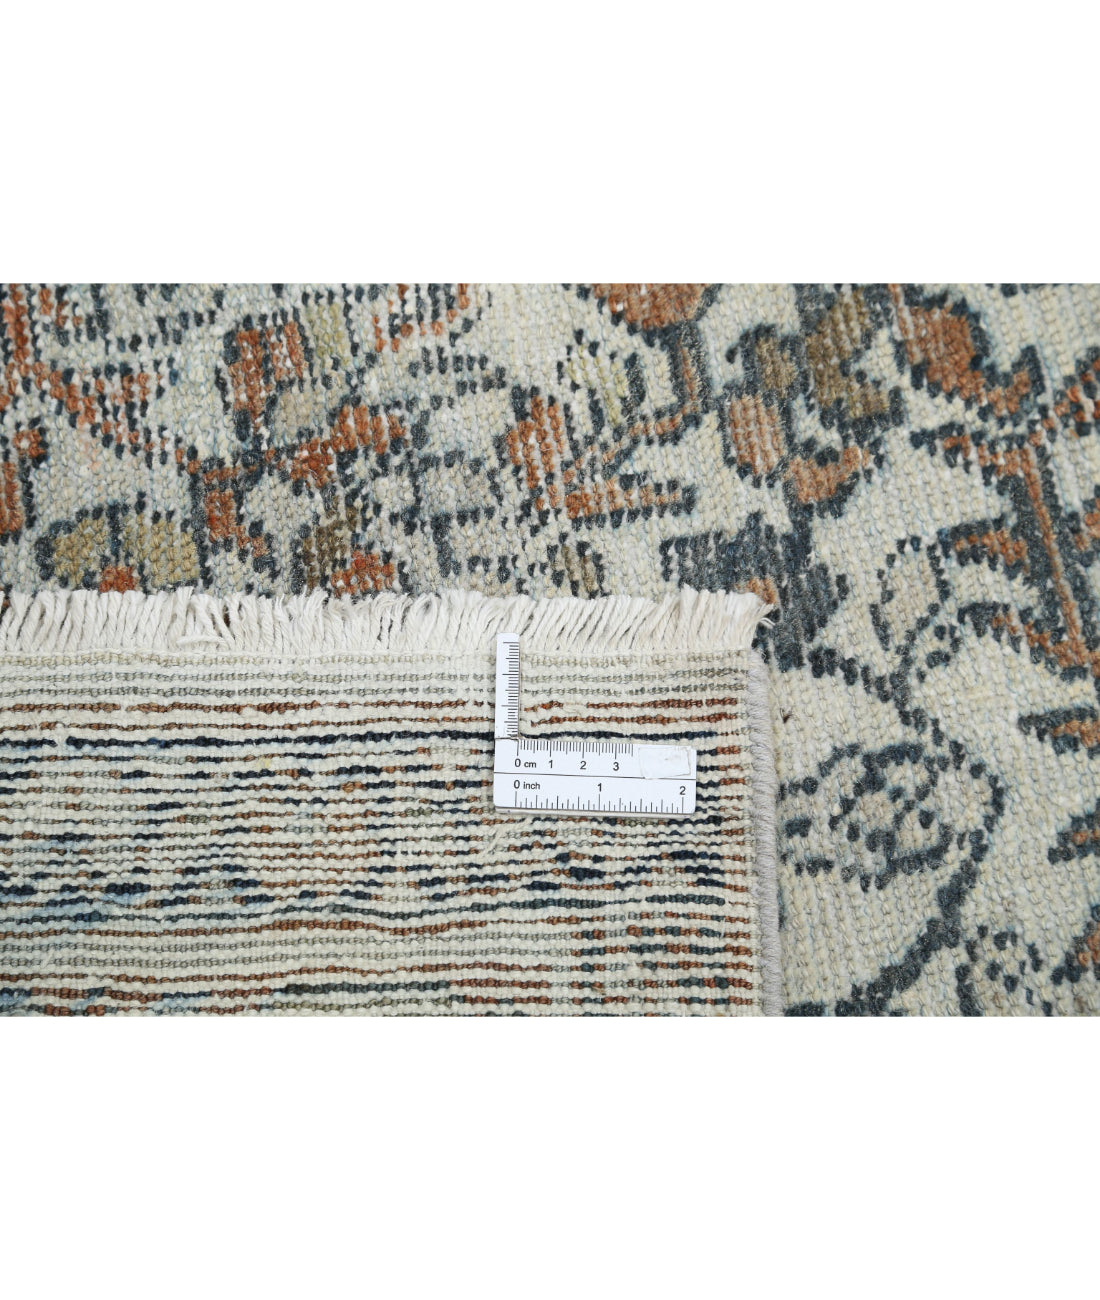 Hand Knotted Antique Persian Mahal Wool Rug - 7'0'' x 10'5'' 7'0'' x 10'5'' (210 X 313) / Ivory / Rust